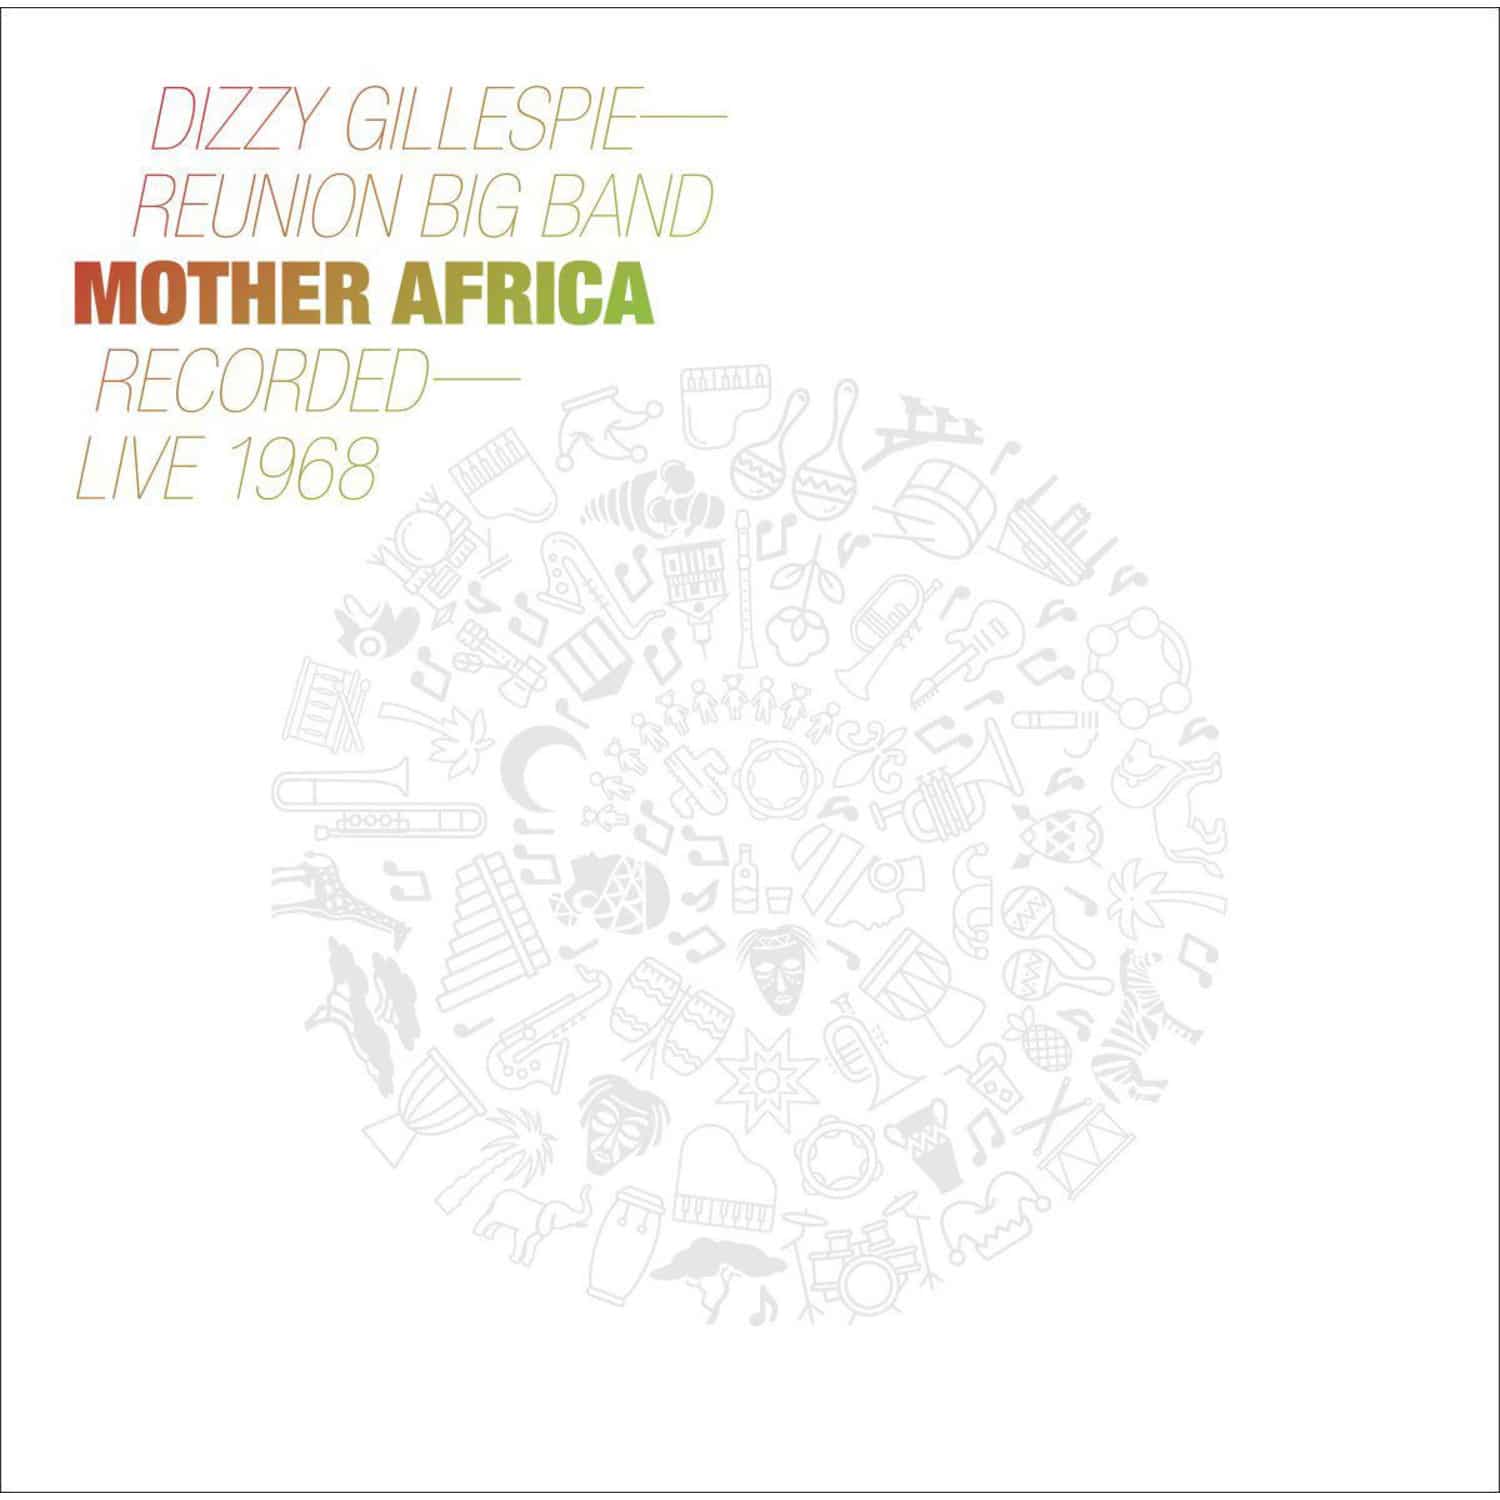 Dizzy Gillespie Reunion Big Band - MOTHER AFRICA - LIVE 1968 